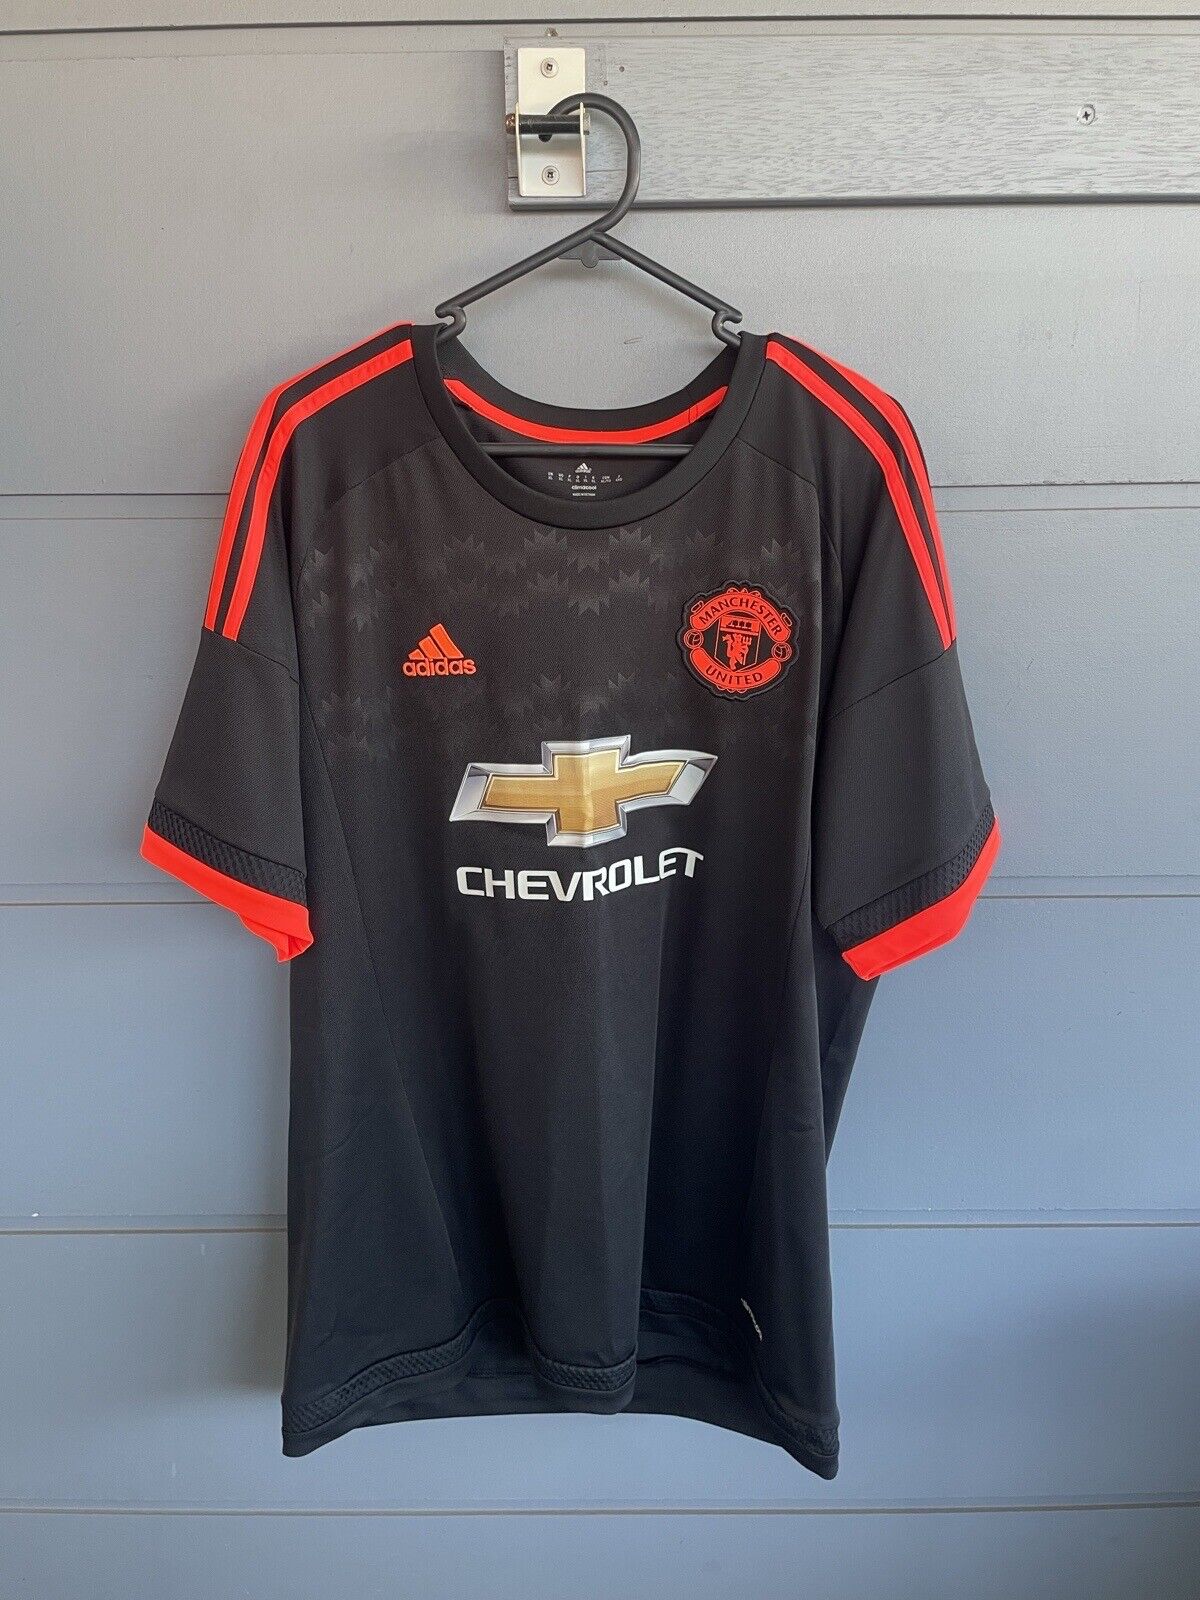 Manchester United 15/16 Third Football Soccer Shirt Jersey Size XL *Authentic*